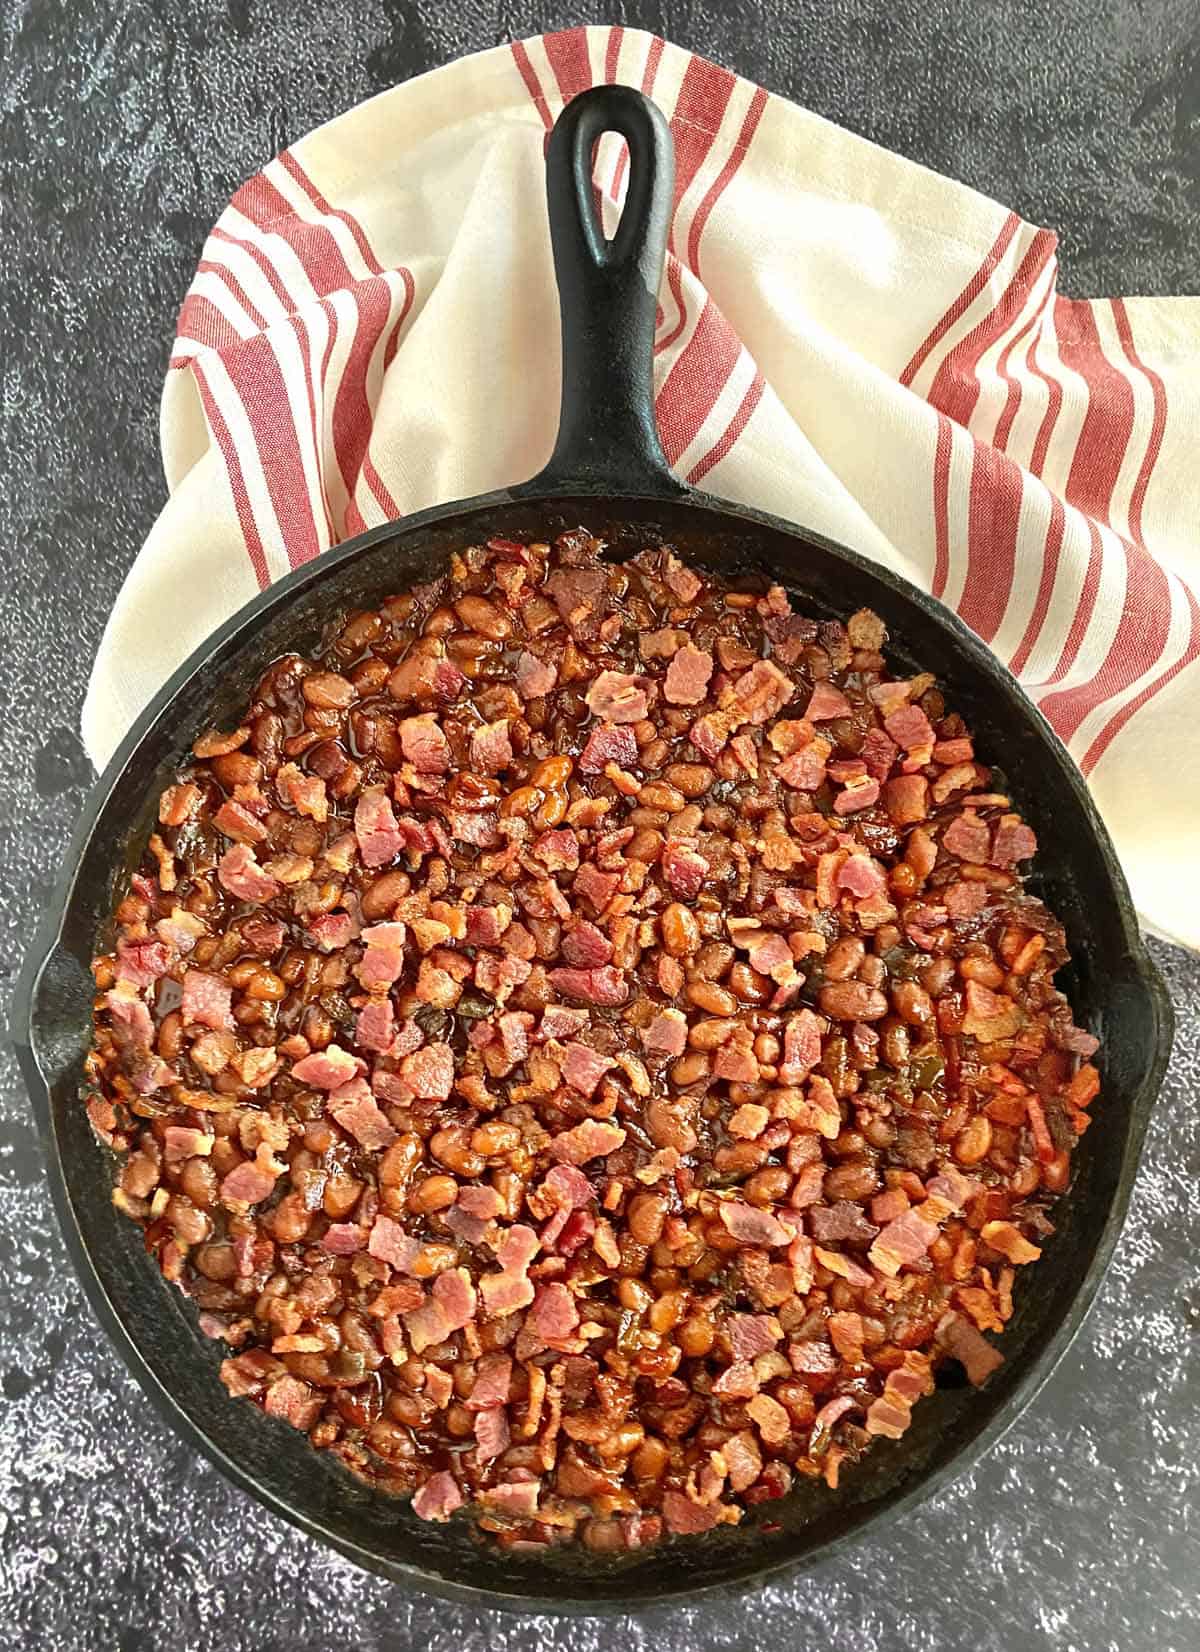 A cast iron skillet filled with smoked baked beans with bacon and brown sugar, with a cloth napkin near the handle.